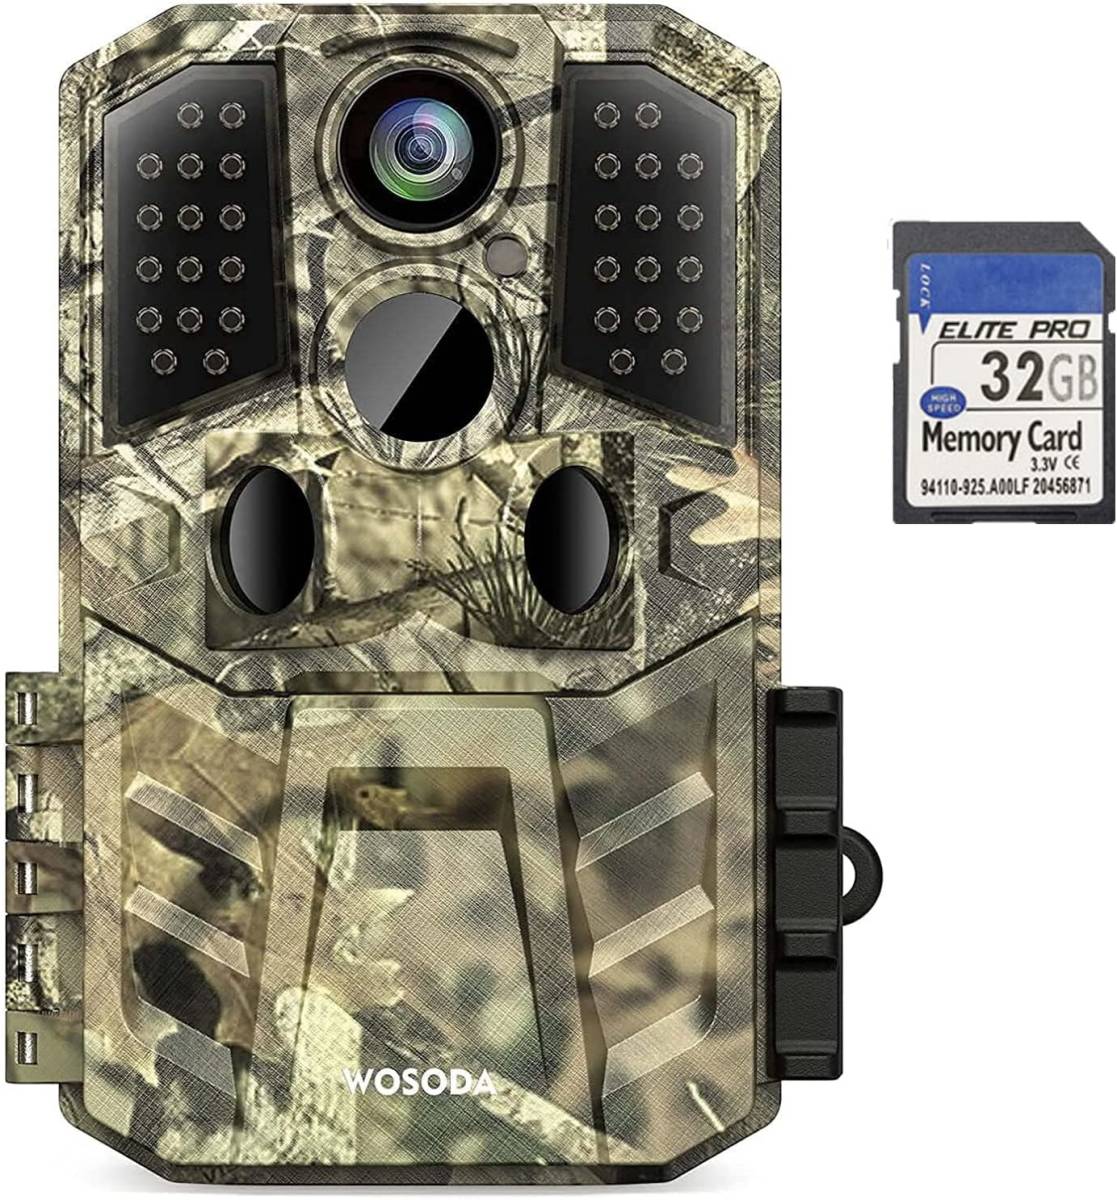 331 Trail camera security camera infra-red rays camera 1920P full HD 2400 ten thousand pixels IP66 class waterproof dustproof 32GB memory card attaching 0.2s super high speed 